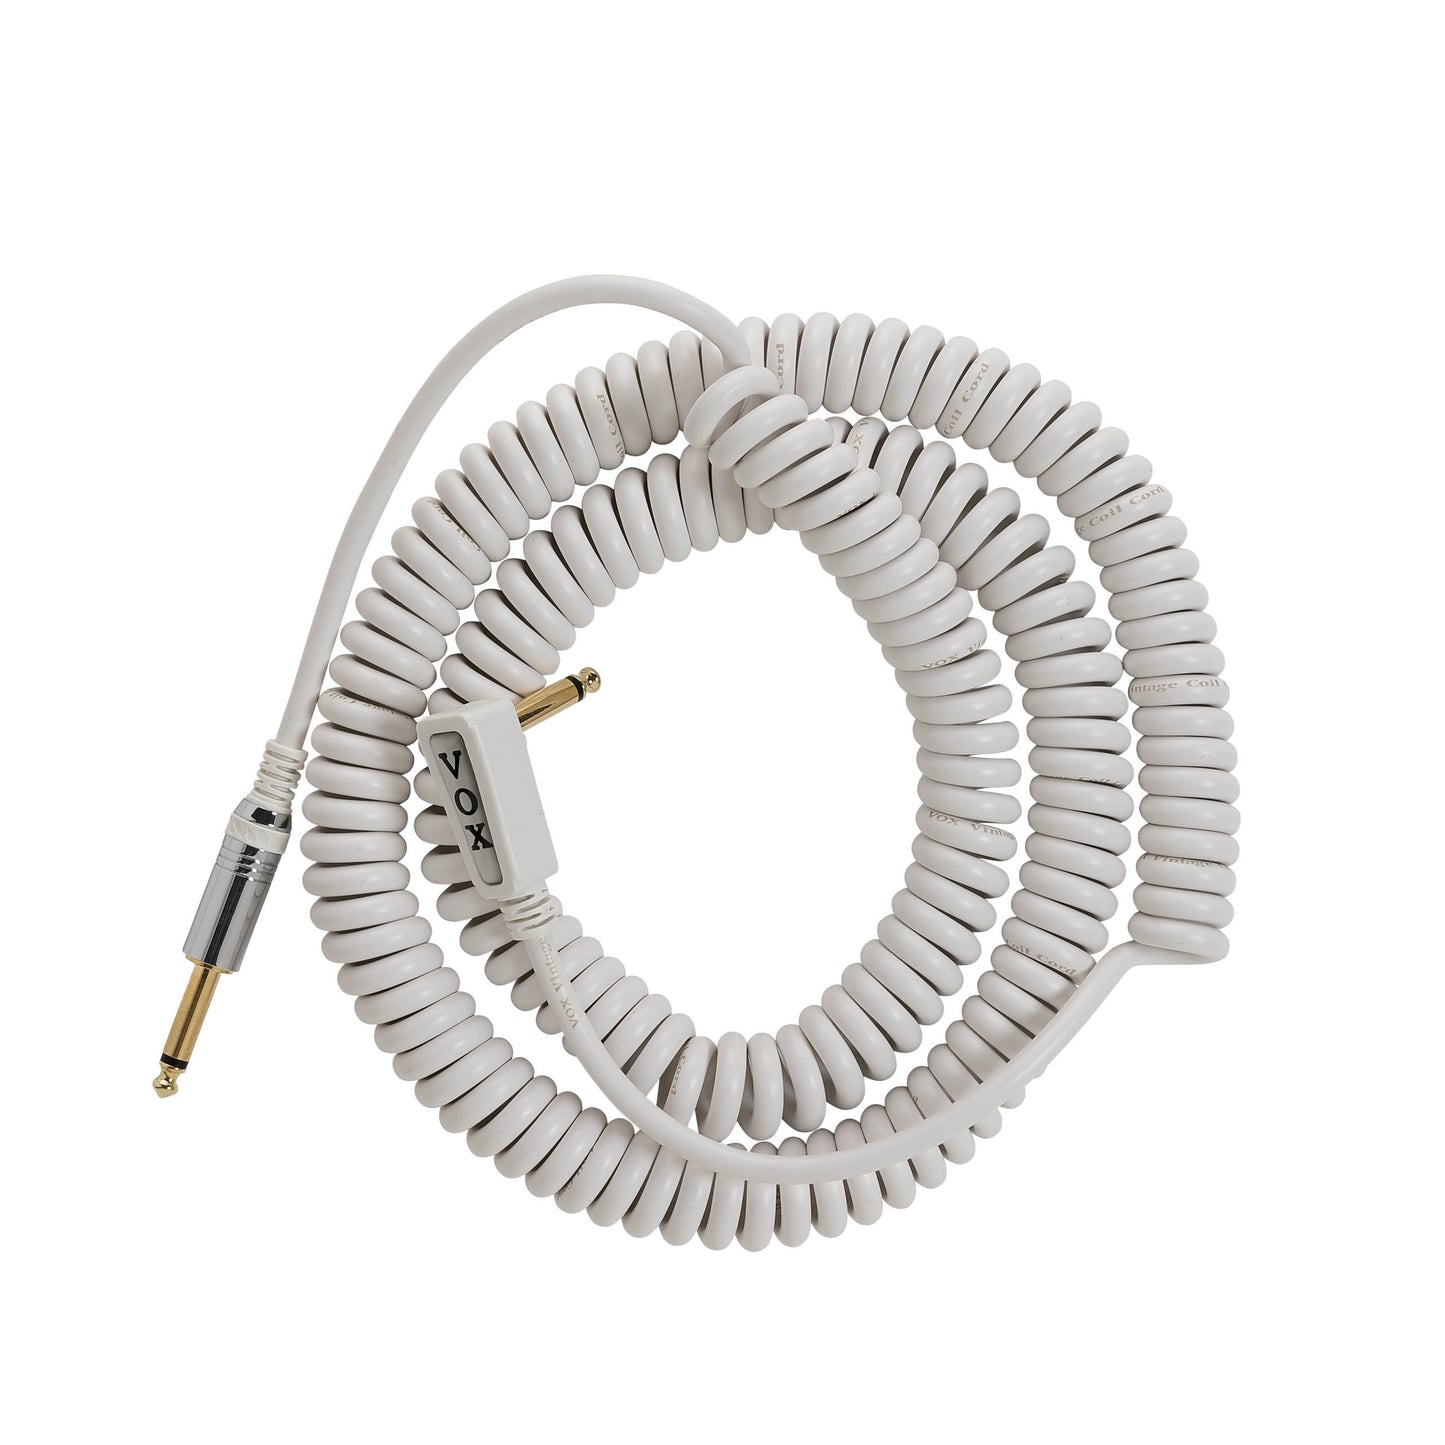 Vox Vintage Coil Cable - 29,5ft - (9 metros) White